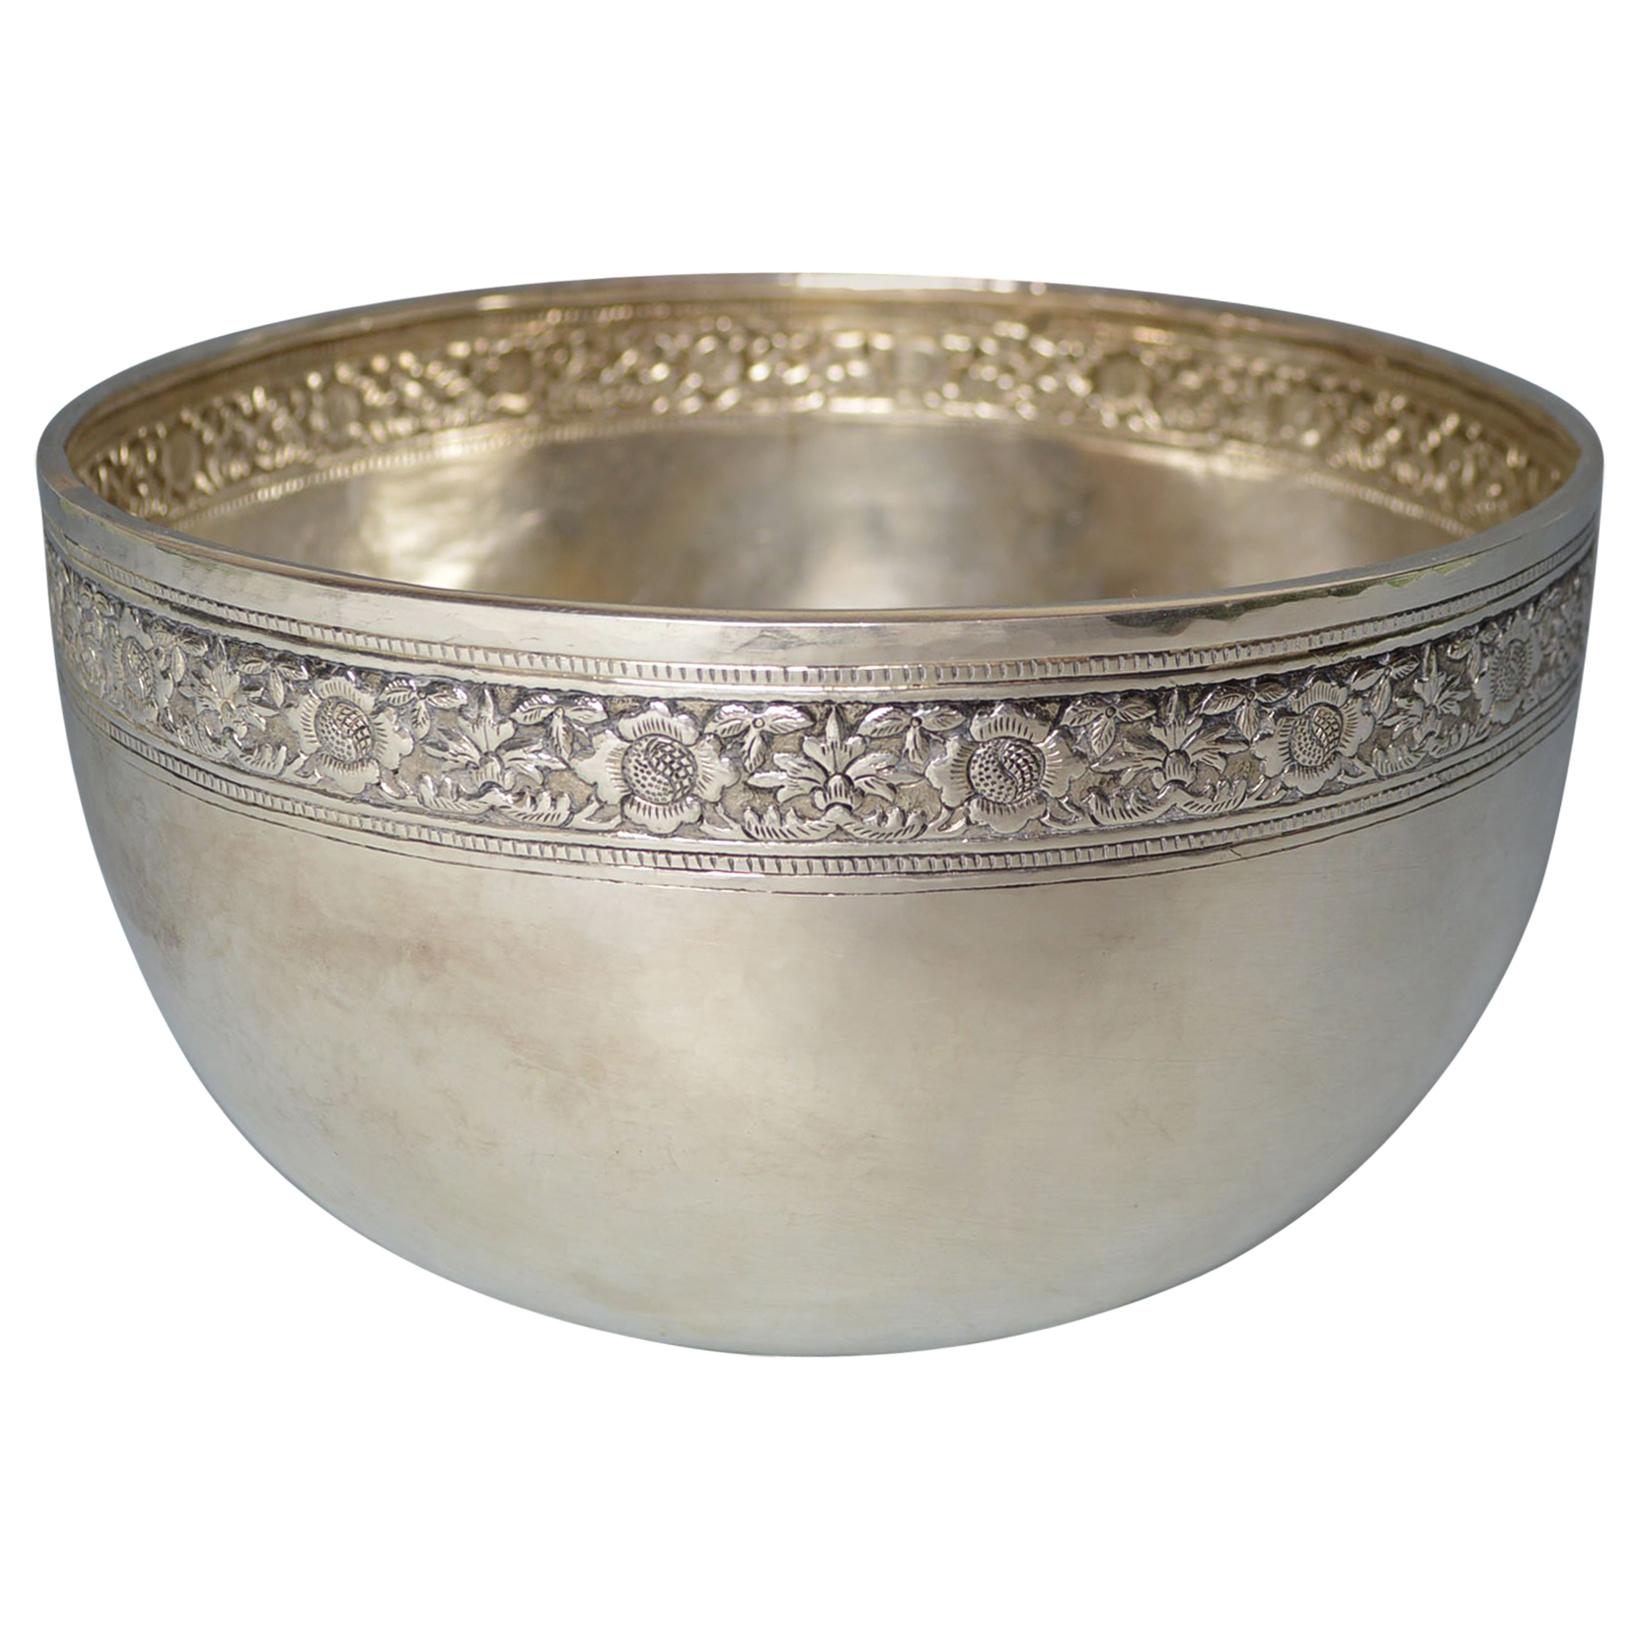 Fine Large Laotian Asian Silver Decorated Bowl Laos